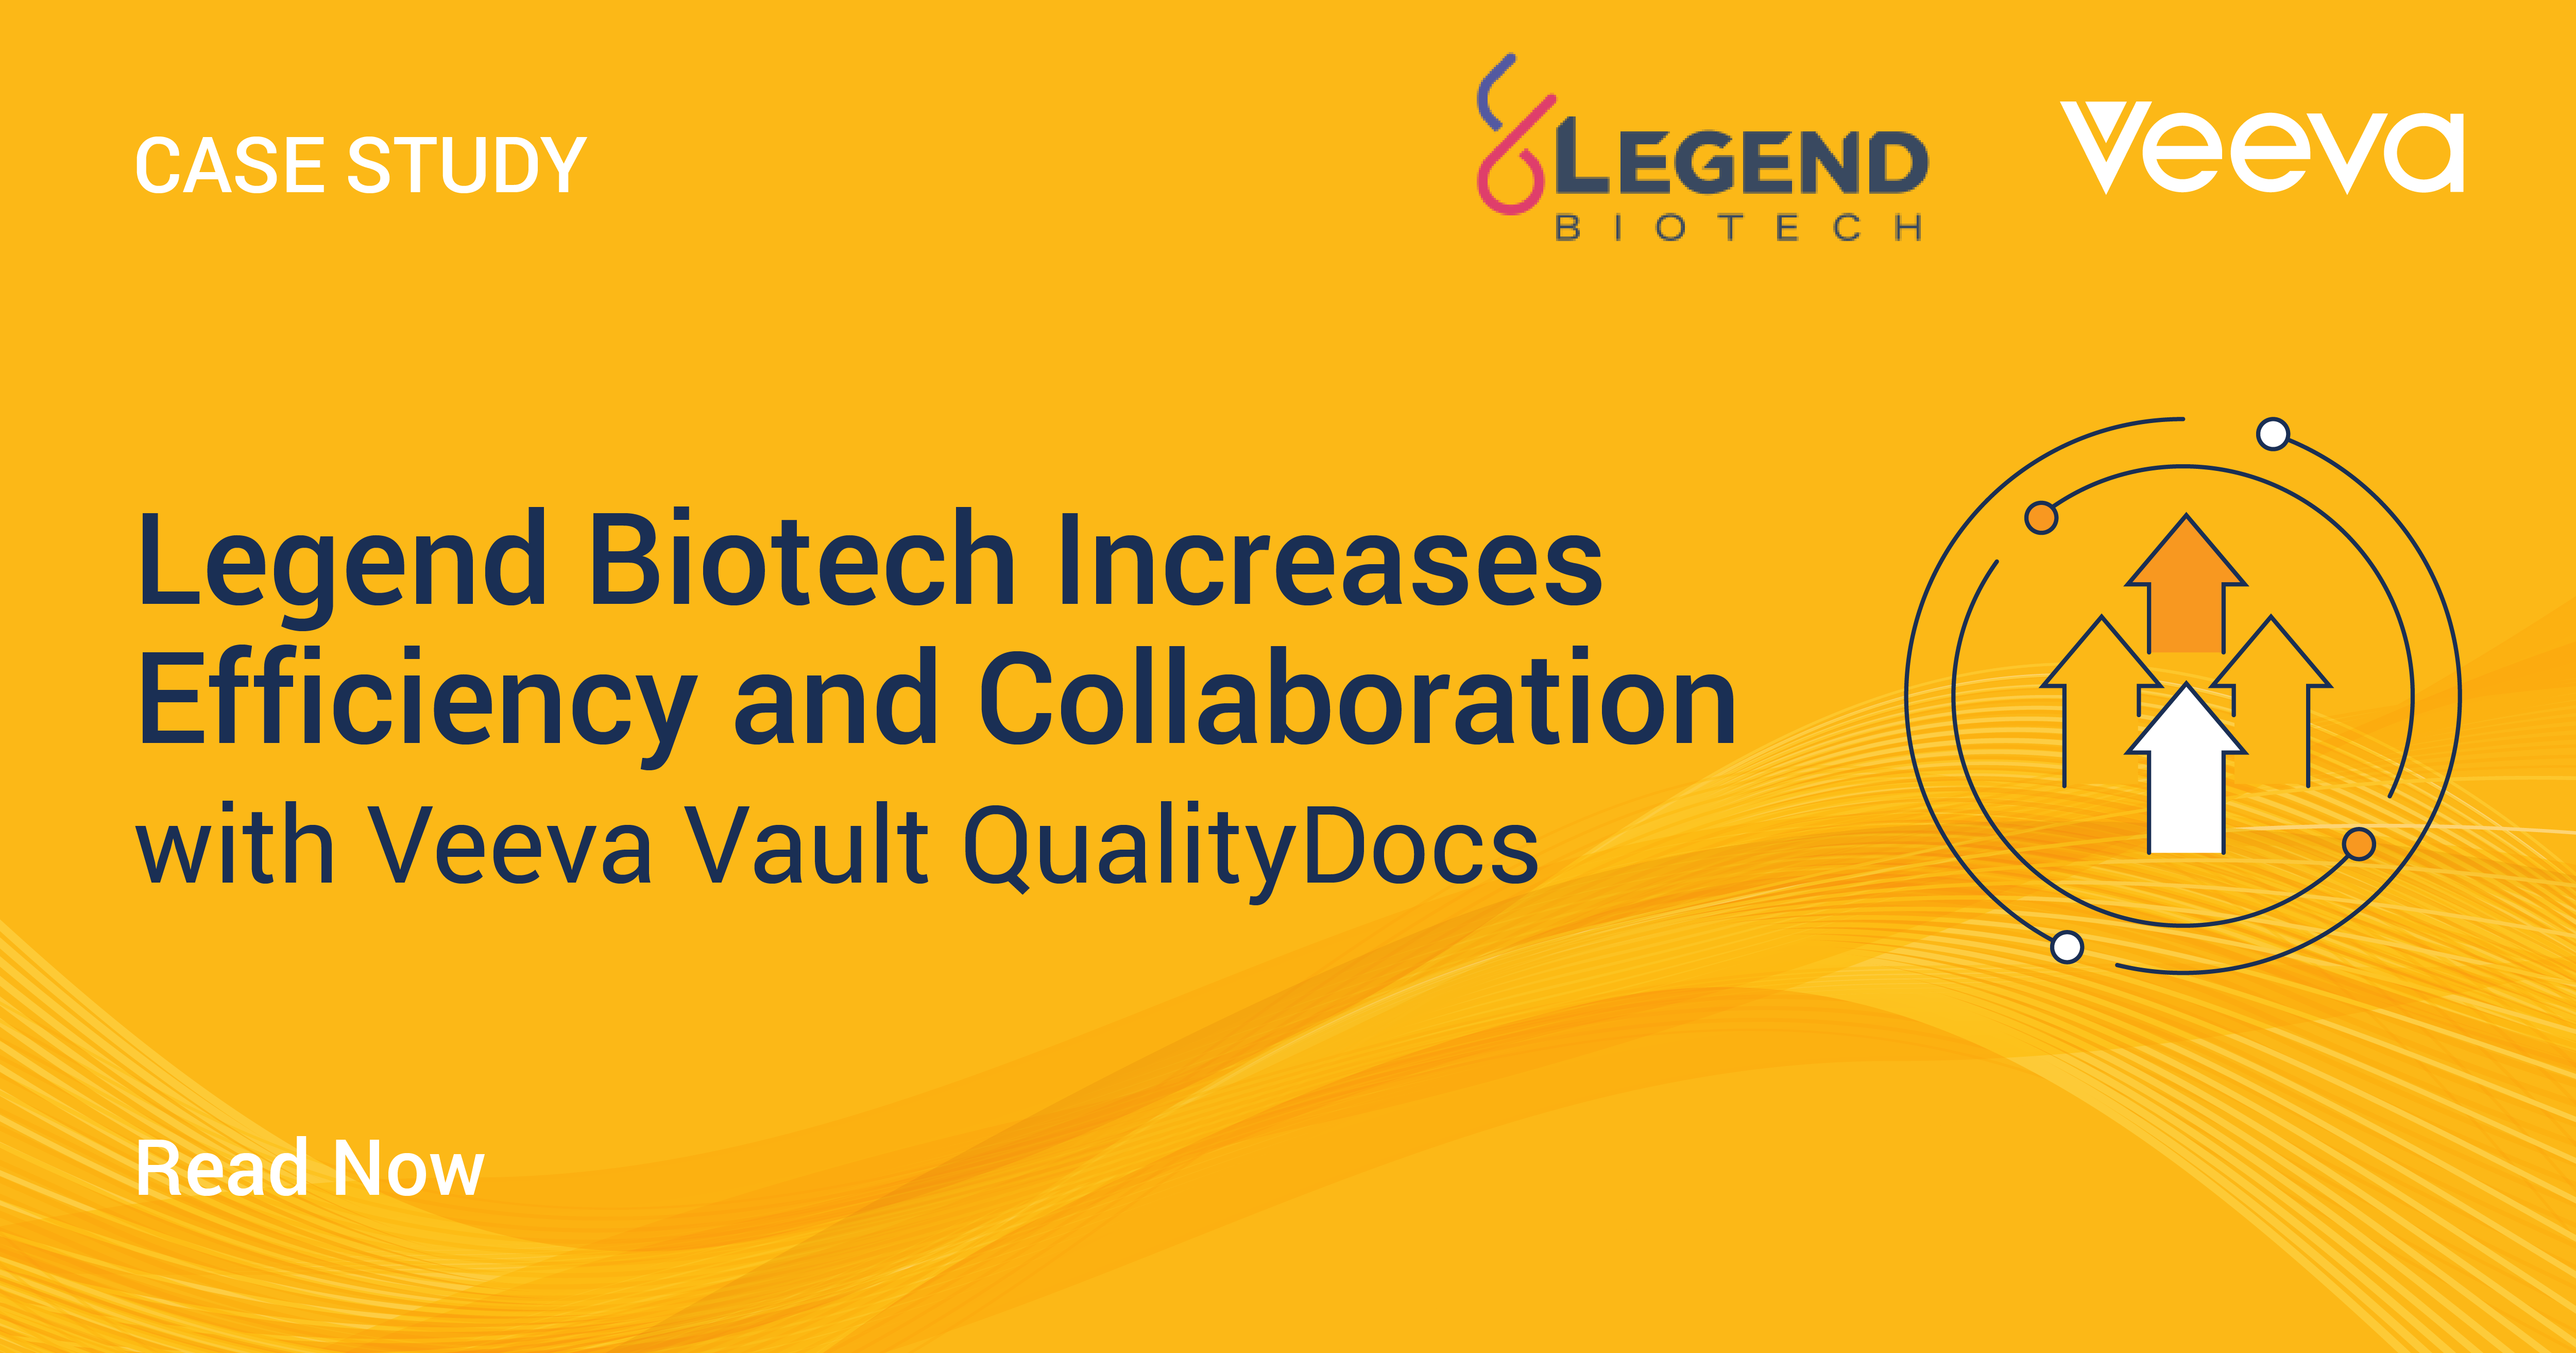 Legend Biotech Increases Efficiency and Collaboration with Veeva Vault